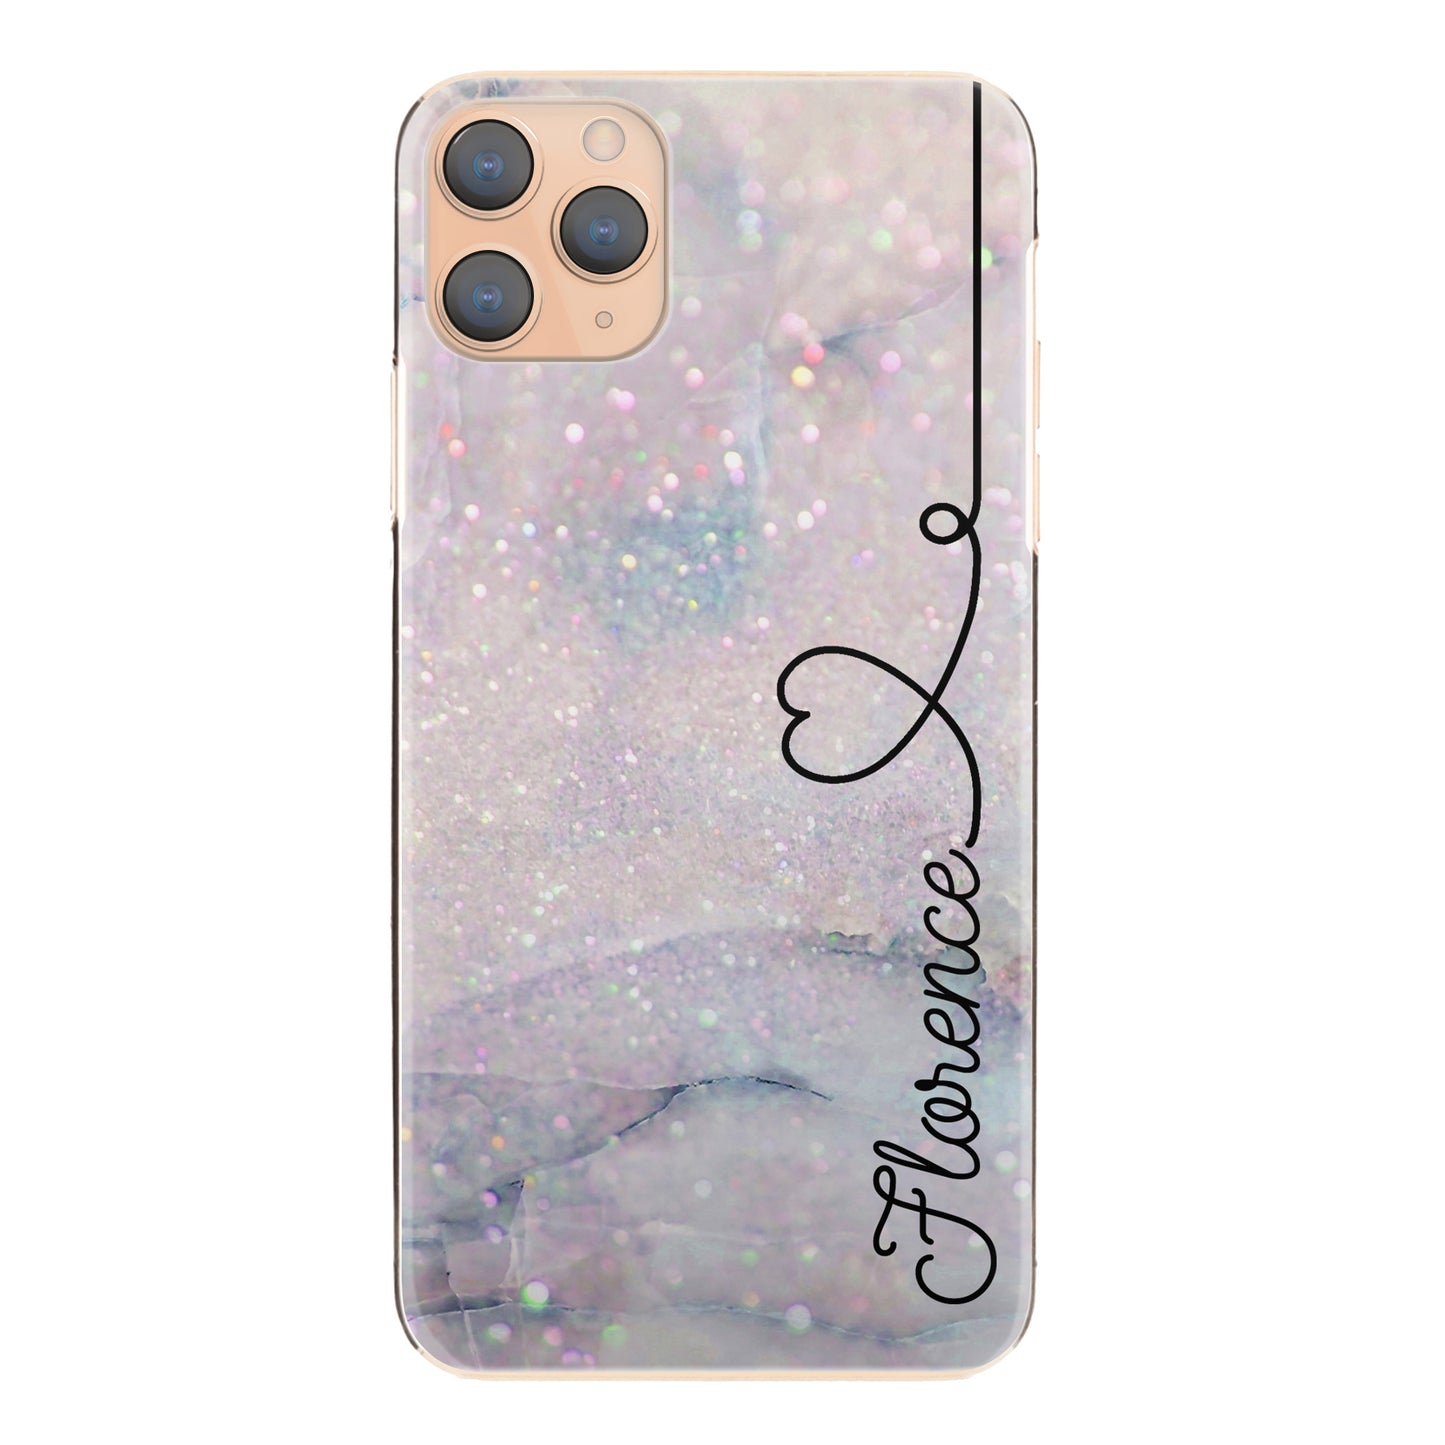 Personalised Xiaomi Phone Hard Case with Stylish Text and Heart Line on Textured Glitter Effect